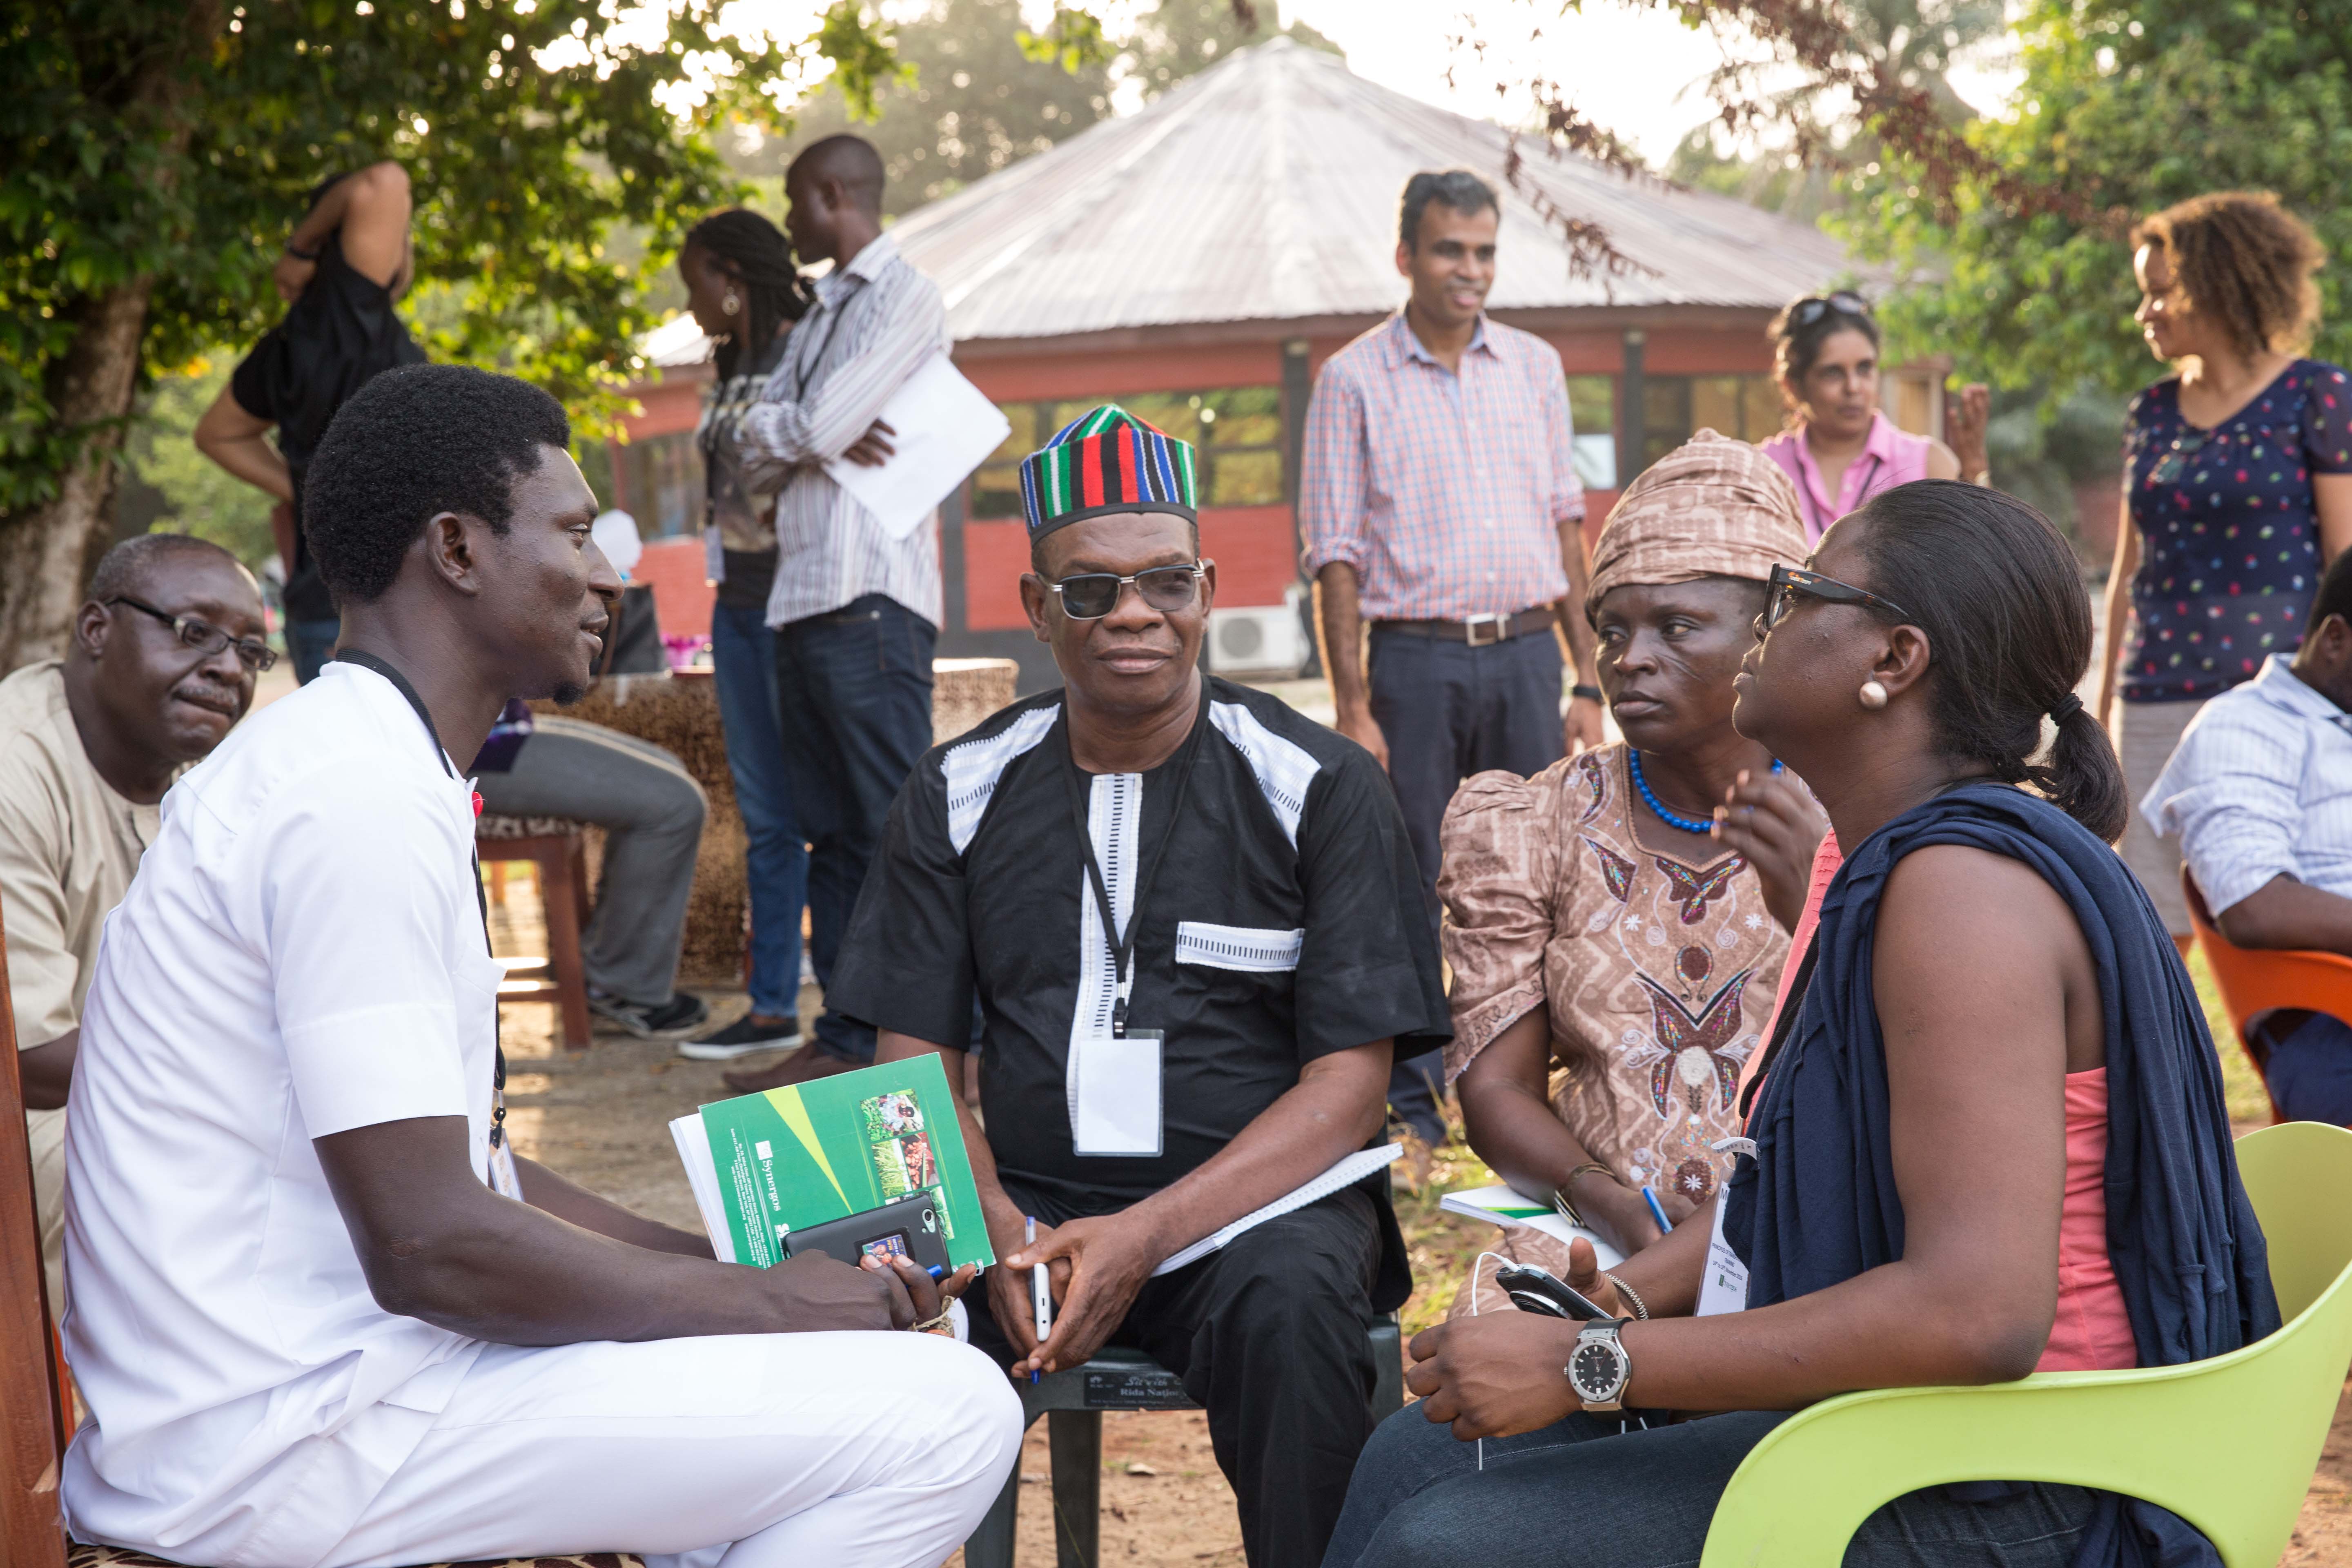 Government officials, farmers, private sector representatives, and community organization members meet during the Principles of Transformation workshop in 2016.